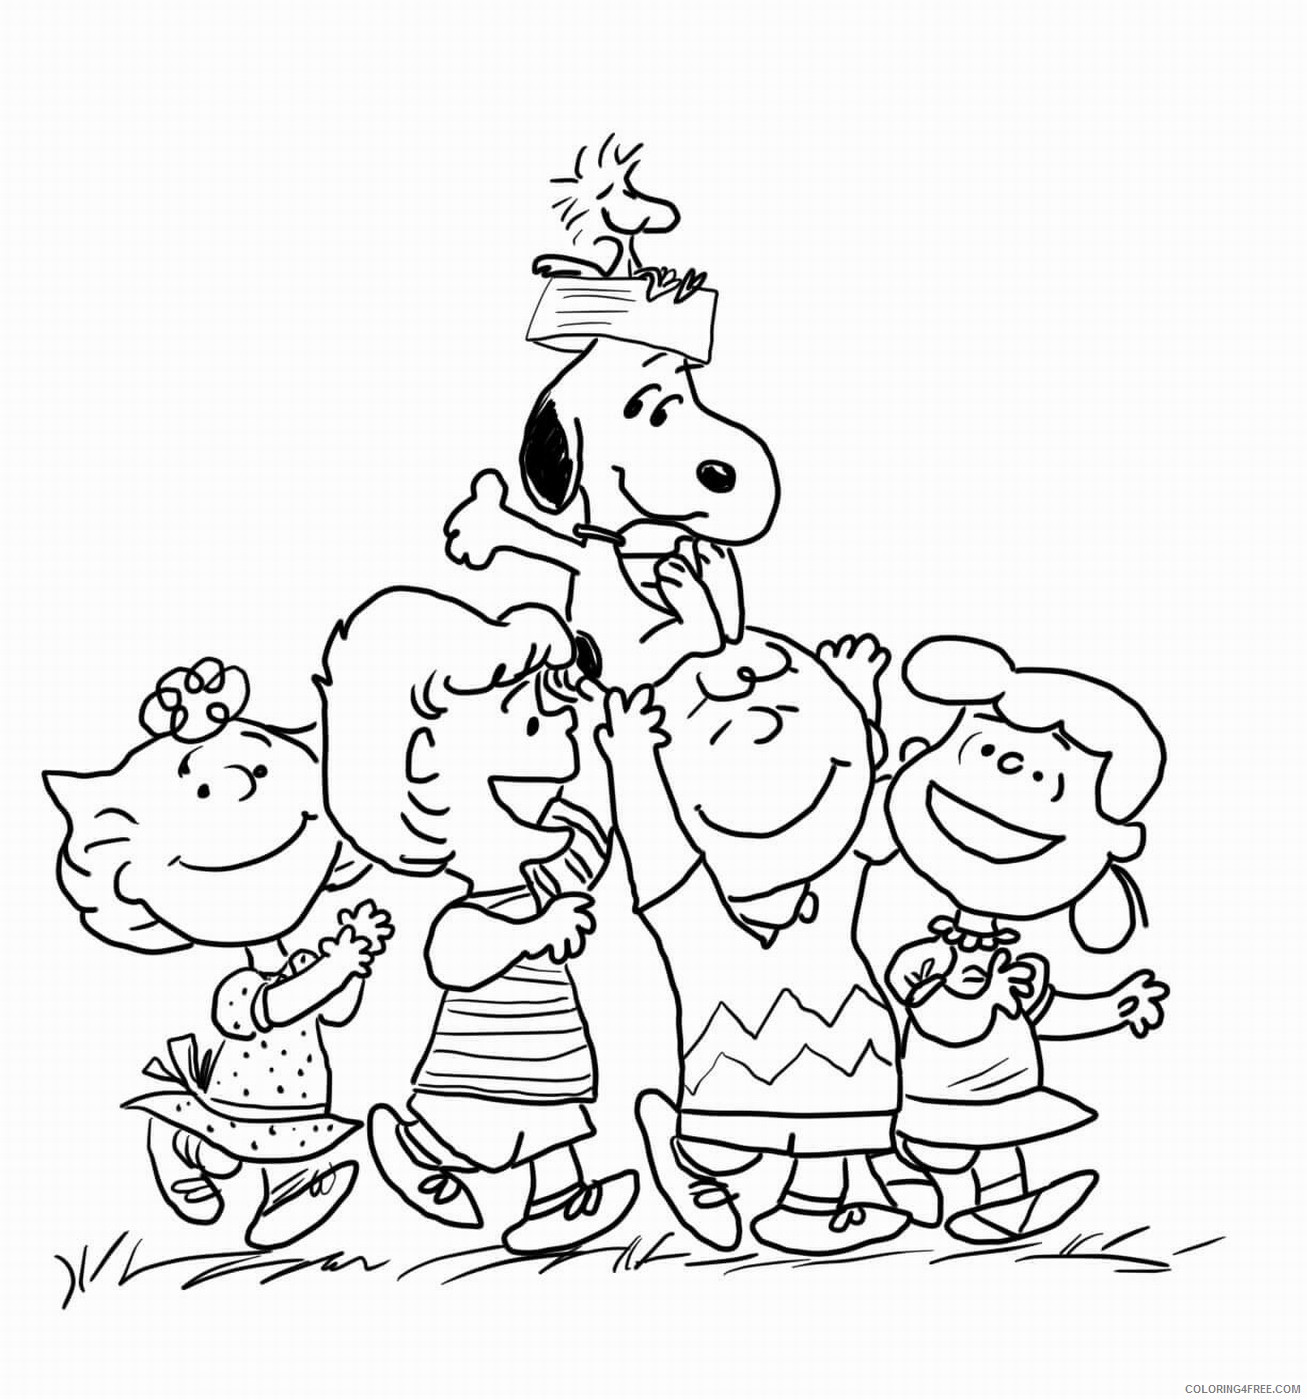 Peanuts Coloring Pages Cartoons peanut movie_9 Printable 2020 4806 Coloring4free